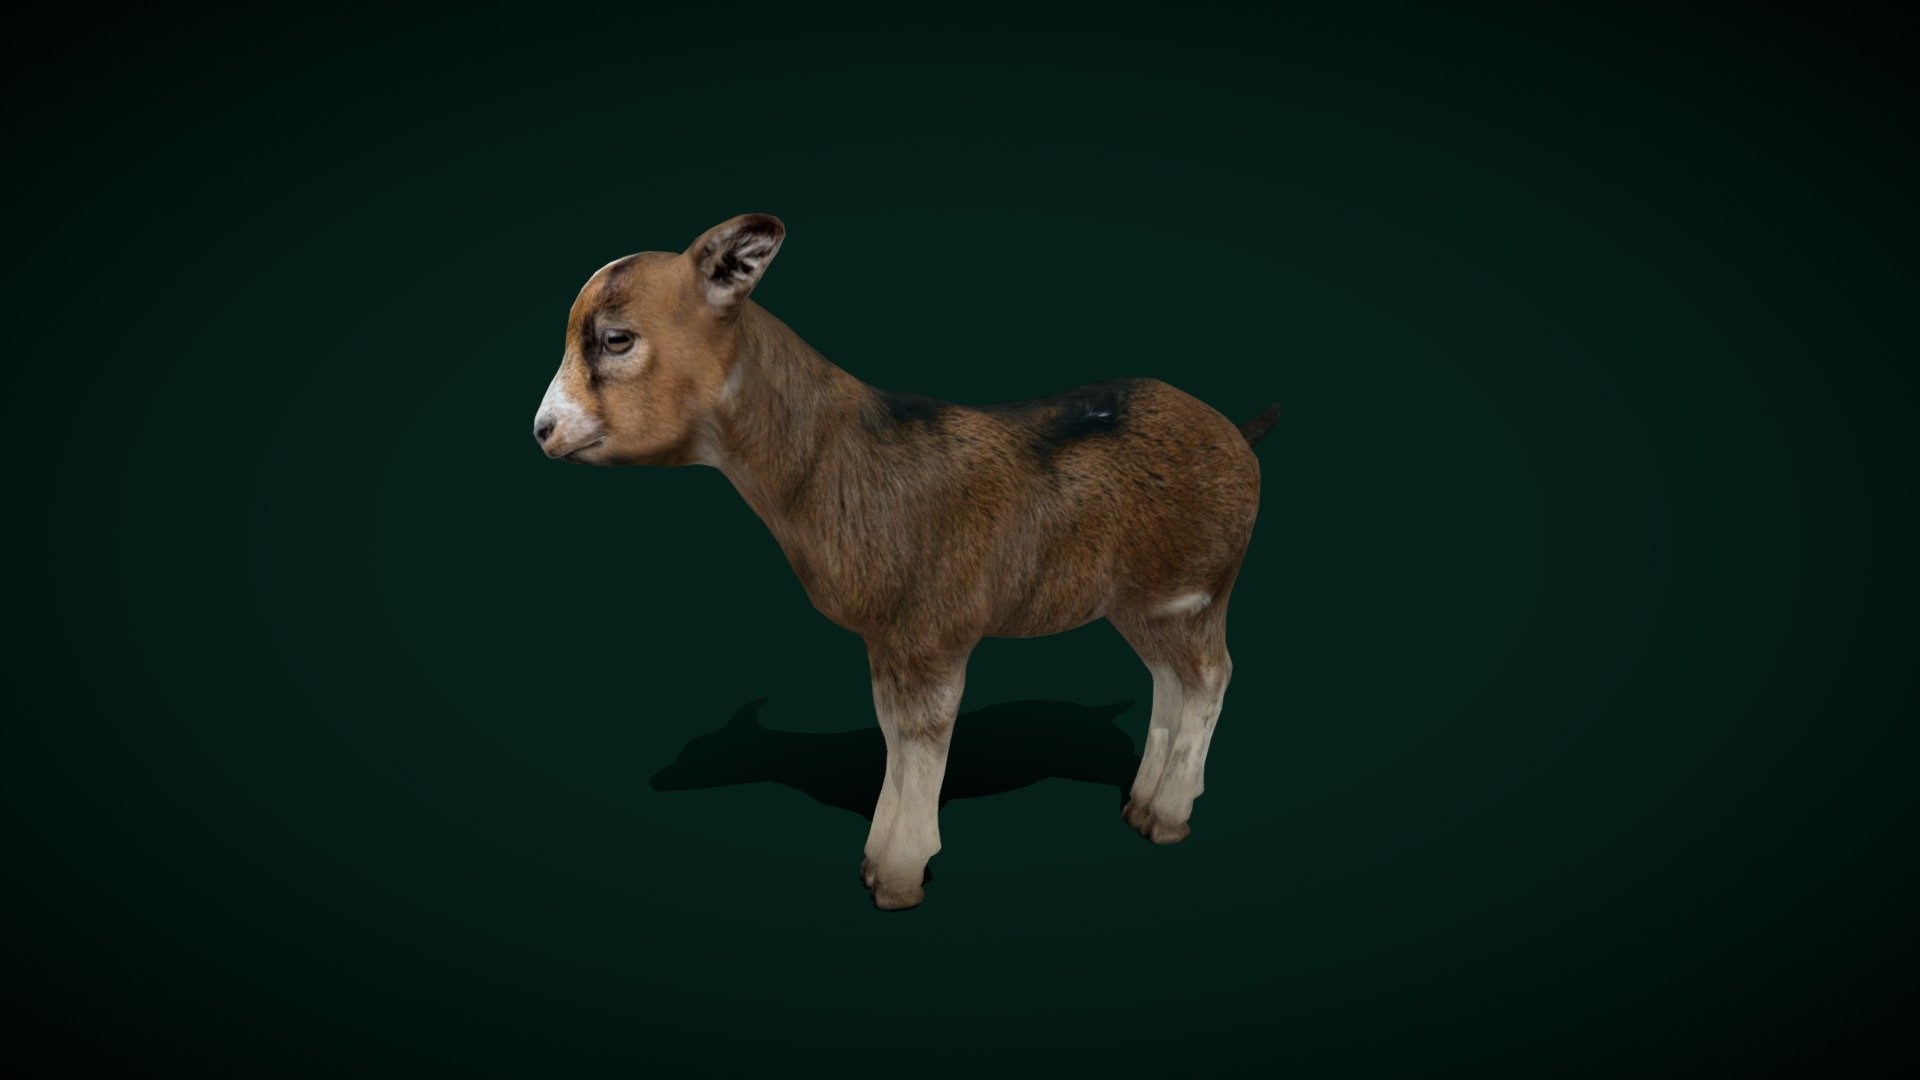 A Kid (Buckling)Domestic Baby Goat,livestock

Capra aegagrus hircus Animal Mammal(goat-antelope)Pet,Cute,Domestic Farm Animal

1 Draw Calls

LowPoly 

Game Ready (Asset)

Subdivision Surface Ready

10- Animations     (Attack,Die,Eat,Idle,Reborn,Run_F/B,Walk_B/F)

4K PBR Textures Material

Unreal FBX (Unreal 4,5 Plus)

Unity FBX

Blend File 3.6.5 LTS

USDZ File (AR Ready). Real Scale Dimension (Xcode ,Reality Composer, Keynote Ready)

Textures Files

GLB File (Unreal 5.1 Plus Native Support)


Gltf File ( Spark AR, Lens Studio(SnapChat) , Effector(Tiktok) , Spline, Play Canvas,Omiverse ) Compatible




Triangles -9449



Faces -5185

Edges -9965

Vertices -4779

Diffuse, Metallic, Roughness , Normal Map ,Specular Map,AO

A baby goat is called a kid. baby female goat is called a doeling, and baby male goat is called a buckling. domestic goat is a domesticated species of goat-antelope typically kept as livestock. It was domesticated from the wild goat of Southwest Asia and Eastern Europe 3d model